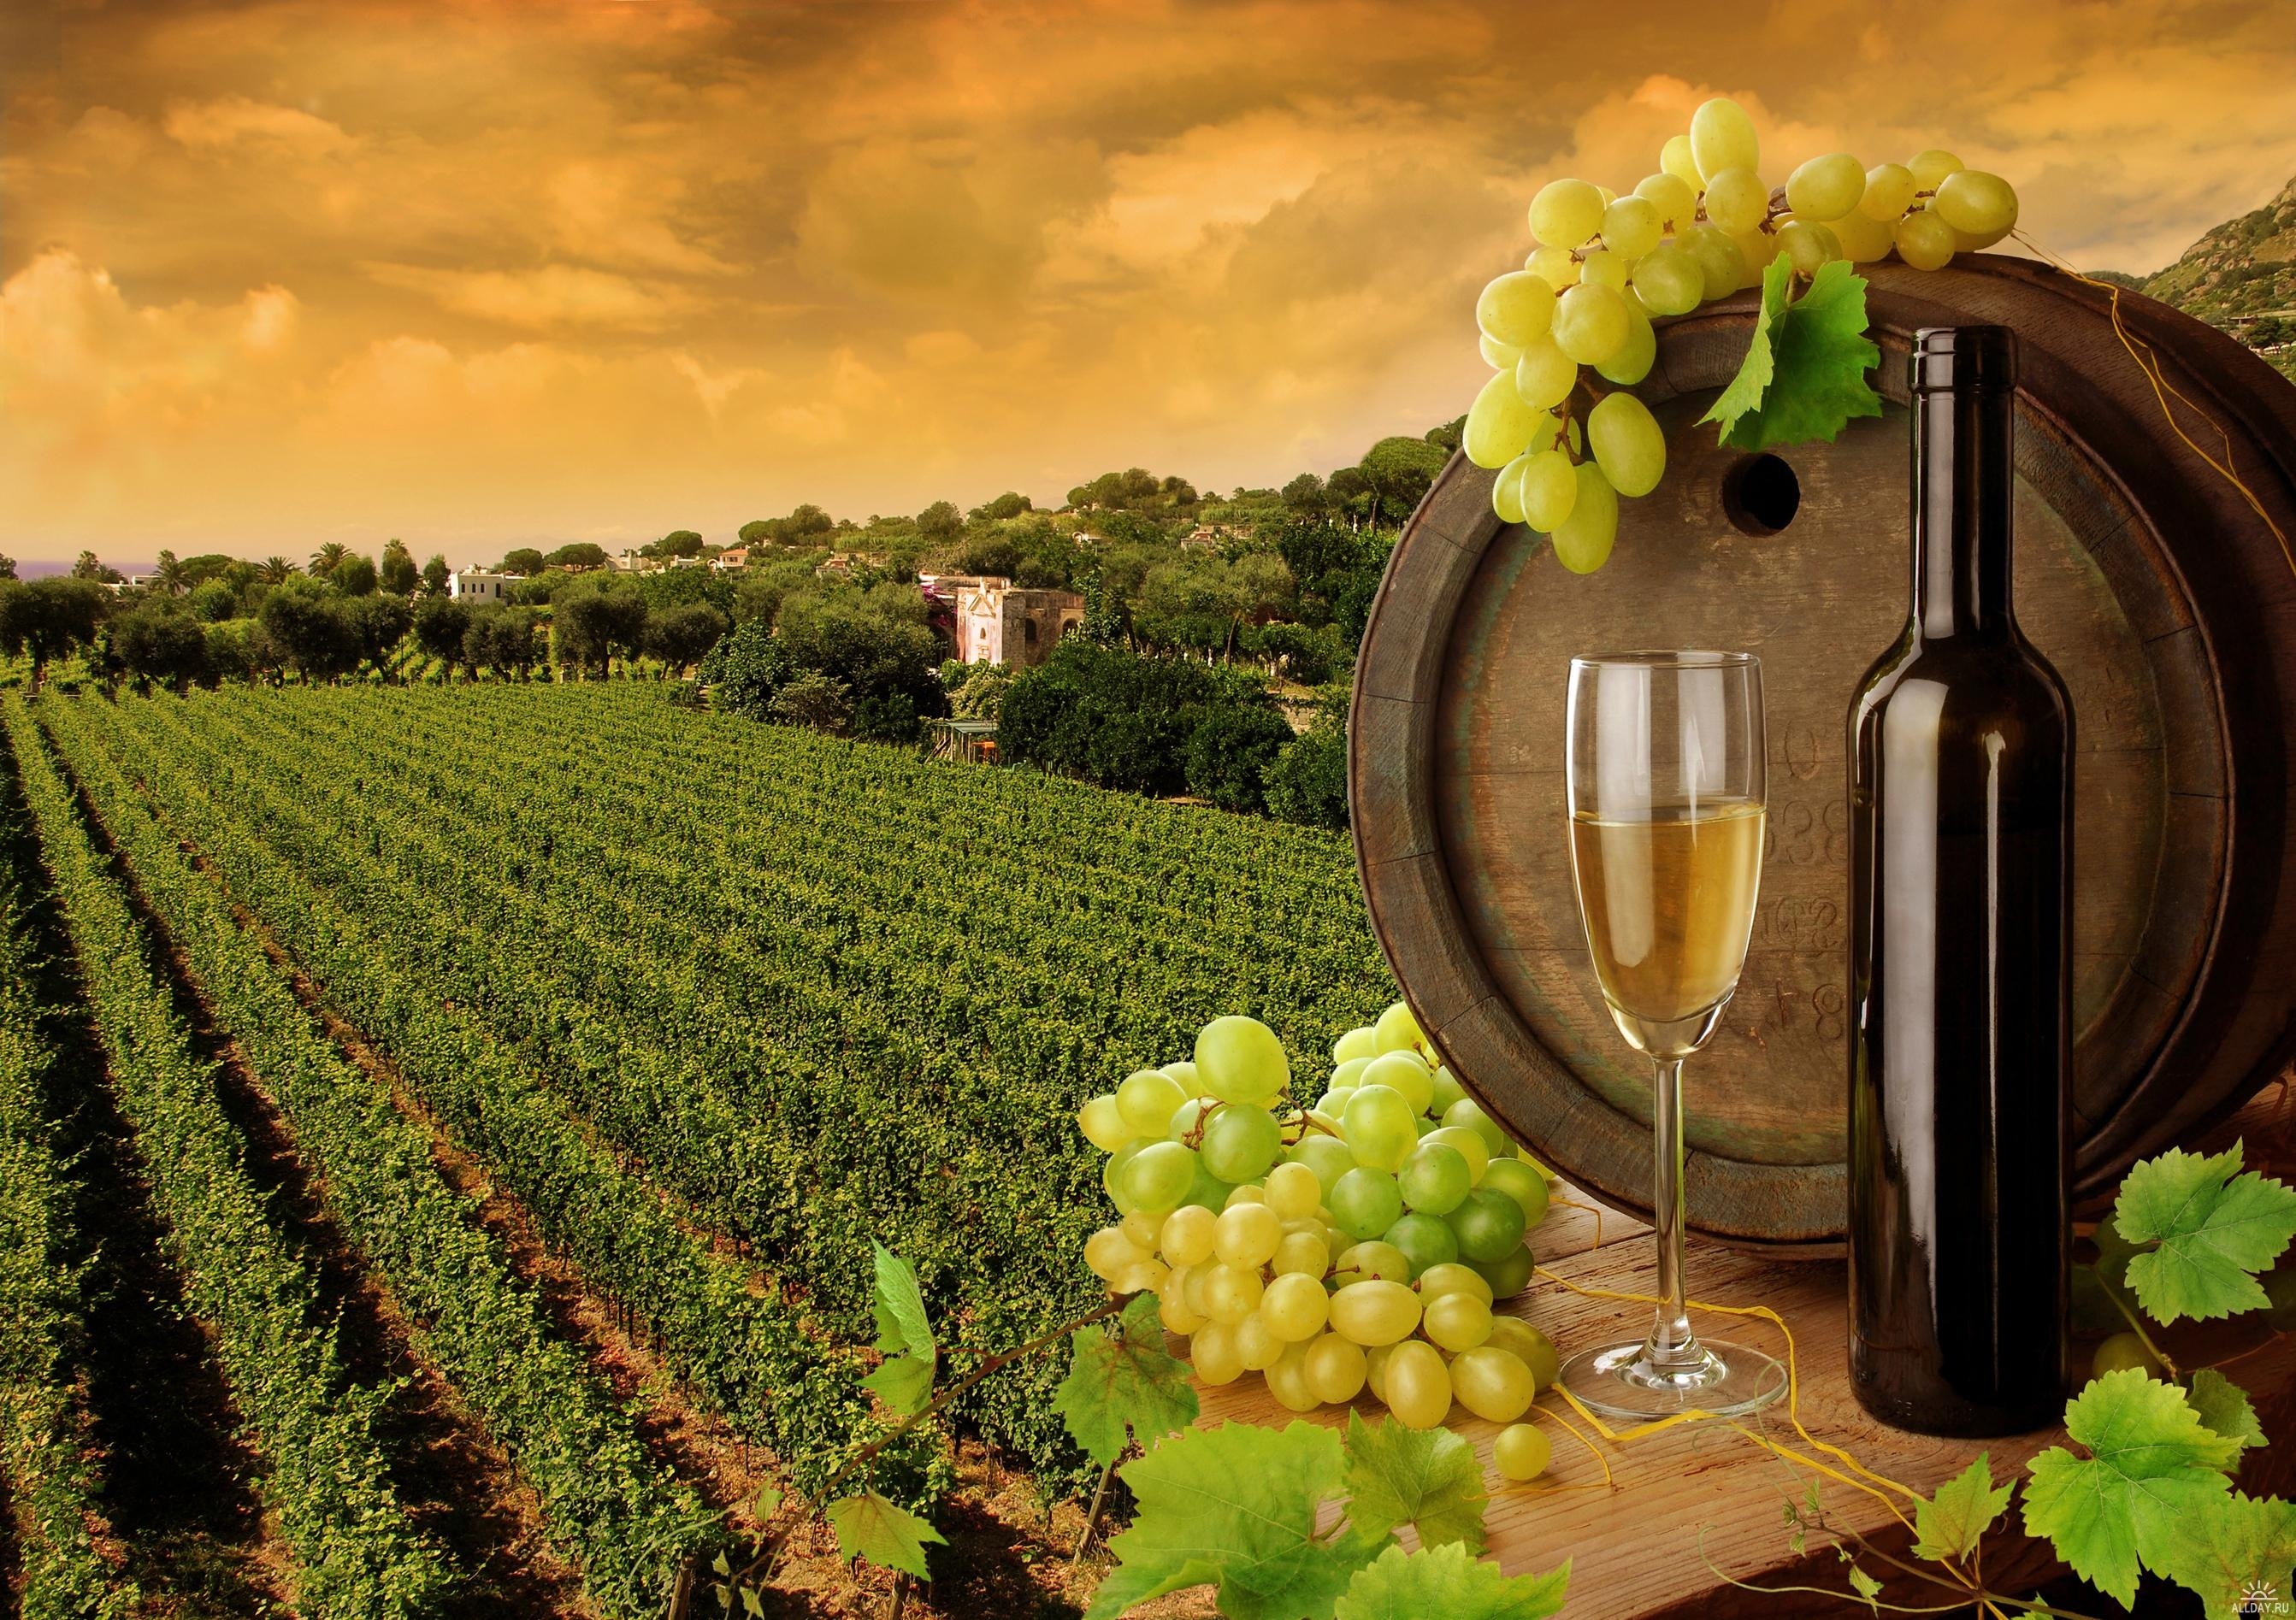 A scenic view of lush green vineyards with grape vines, showcasing a beautiful landscape and hints of wine.